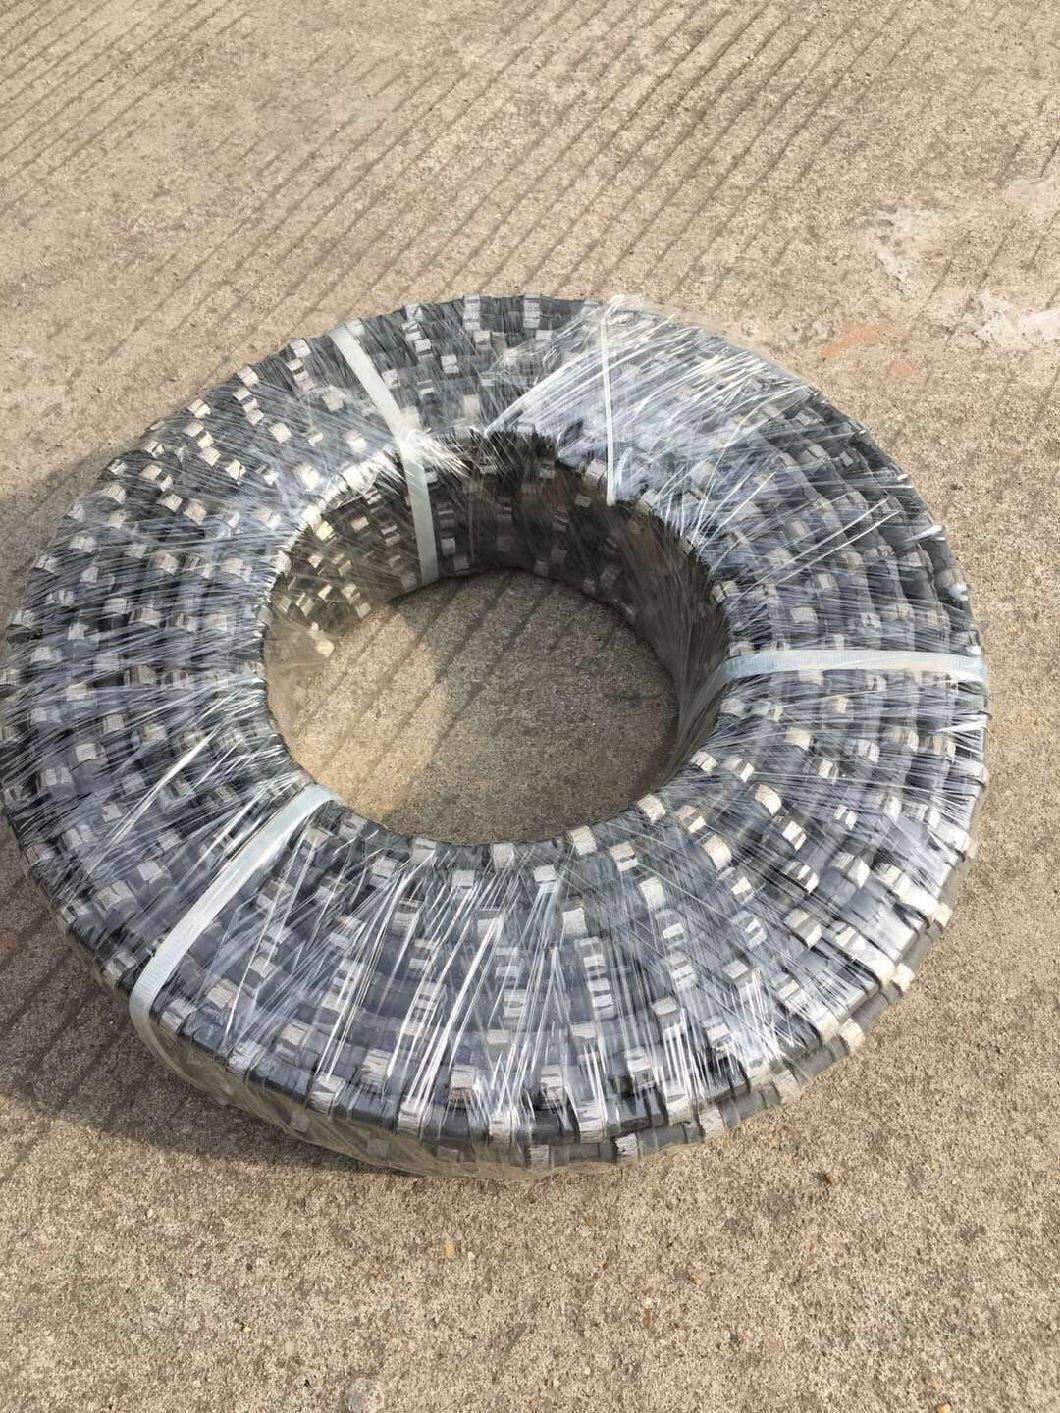 Fast Cutting and Durable Diamond Wire Saw for Marble Granite Stone Quarry